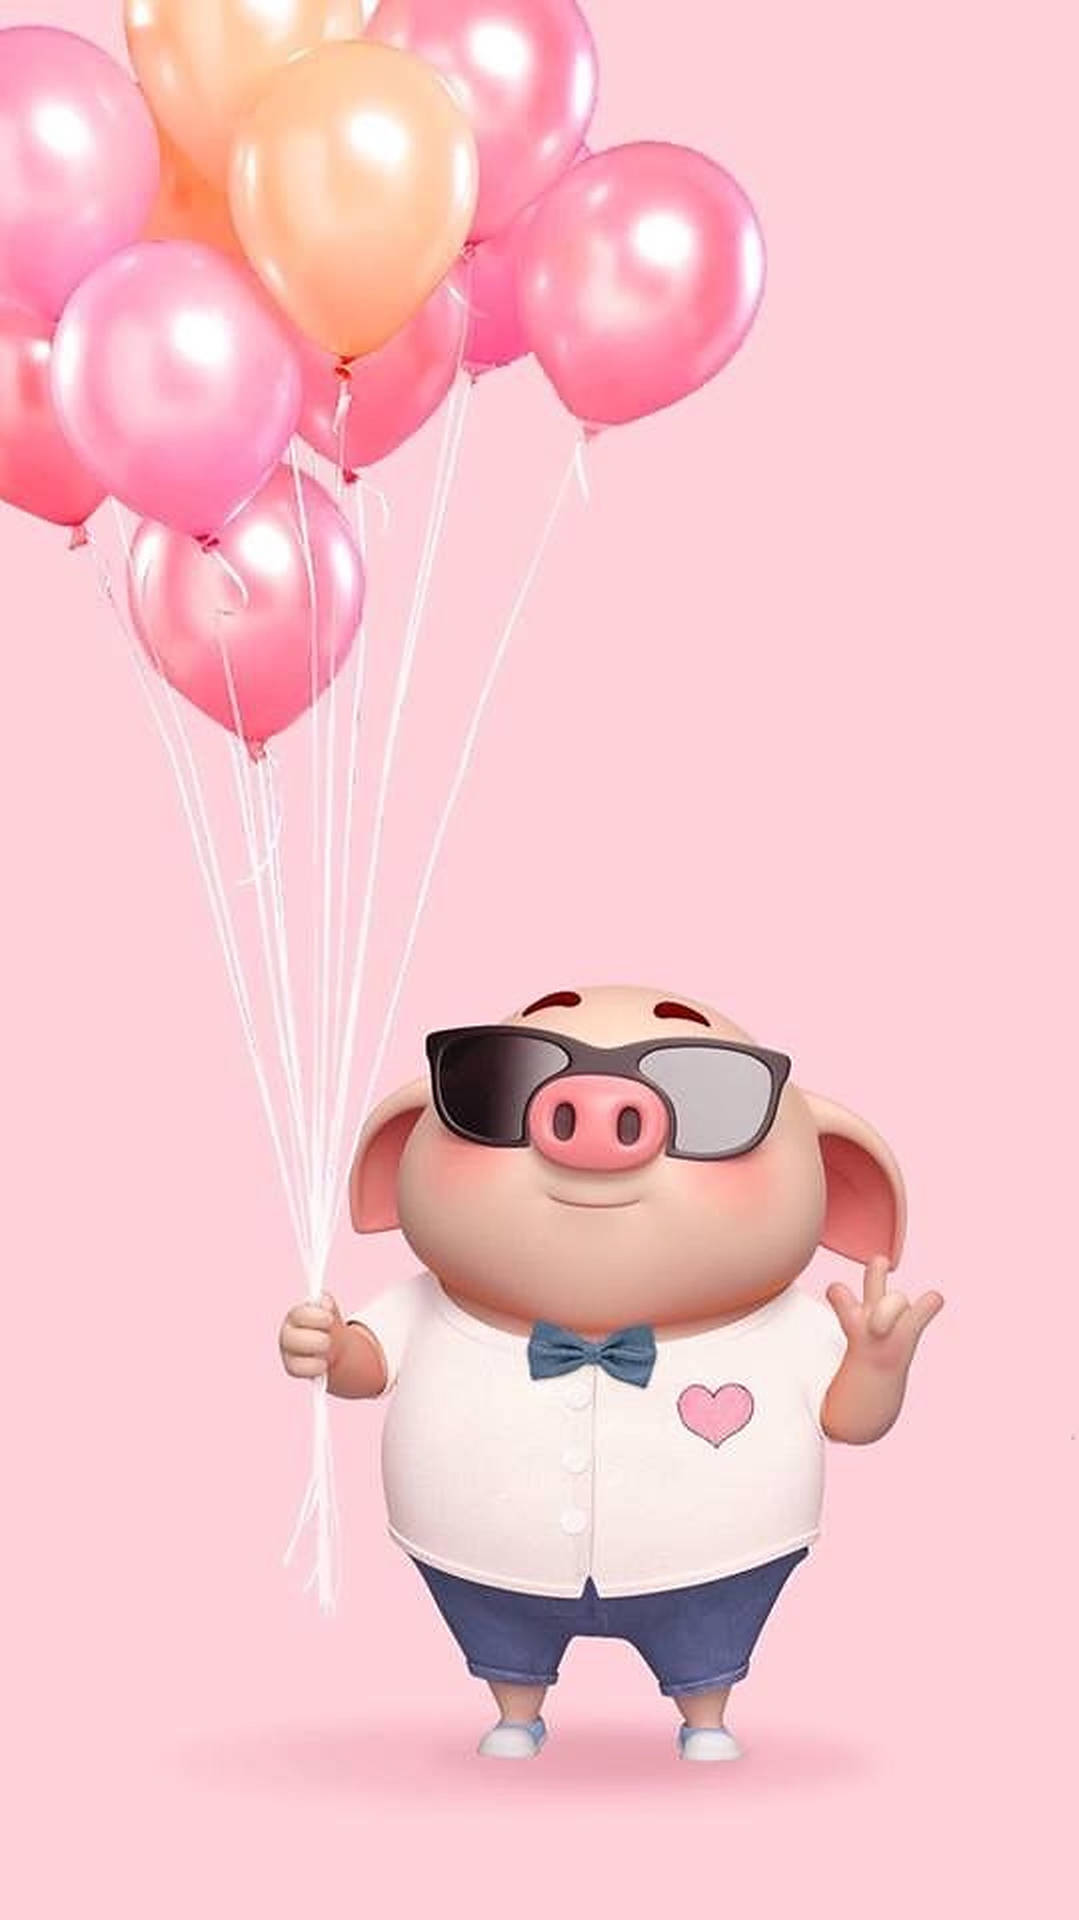 Cute Pig With Balloons Wallpaper